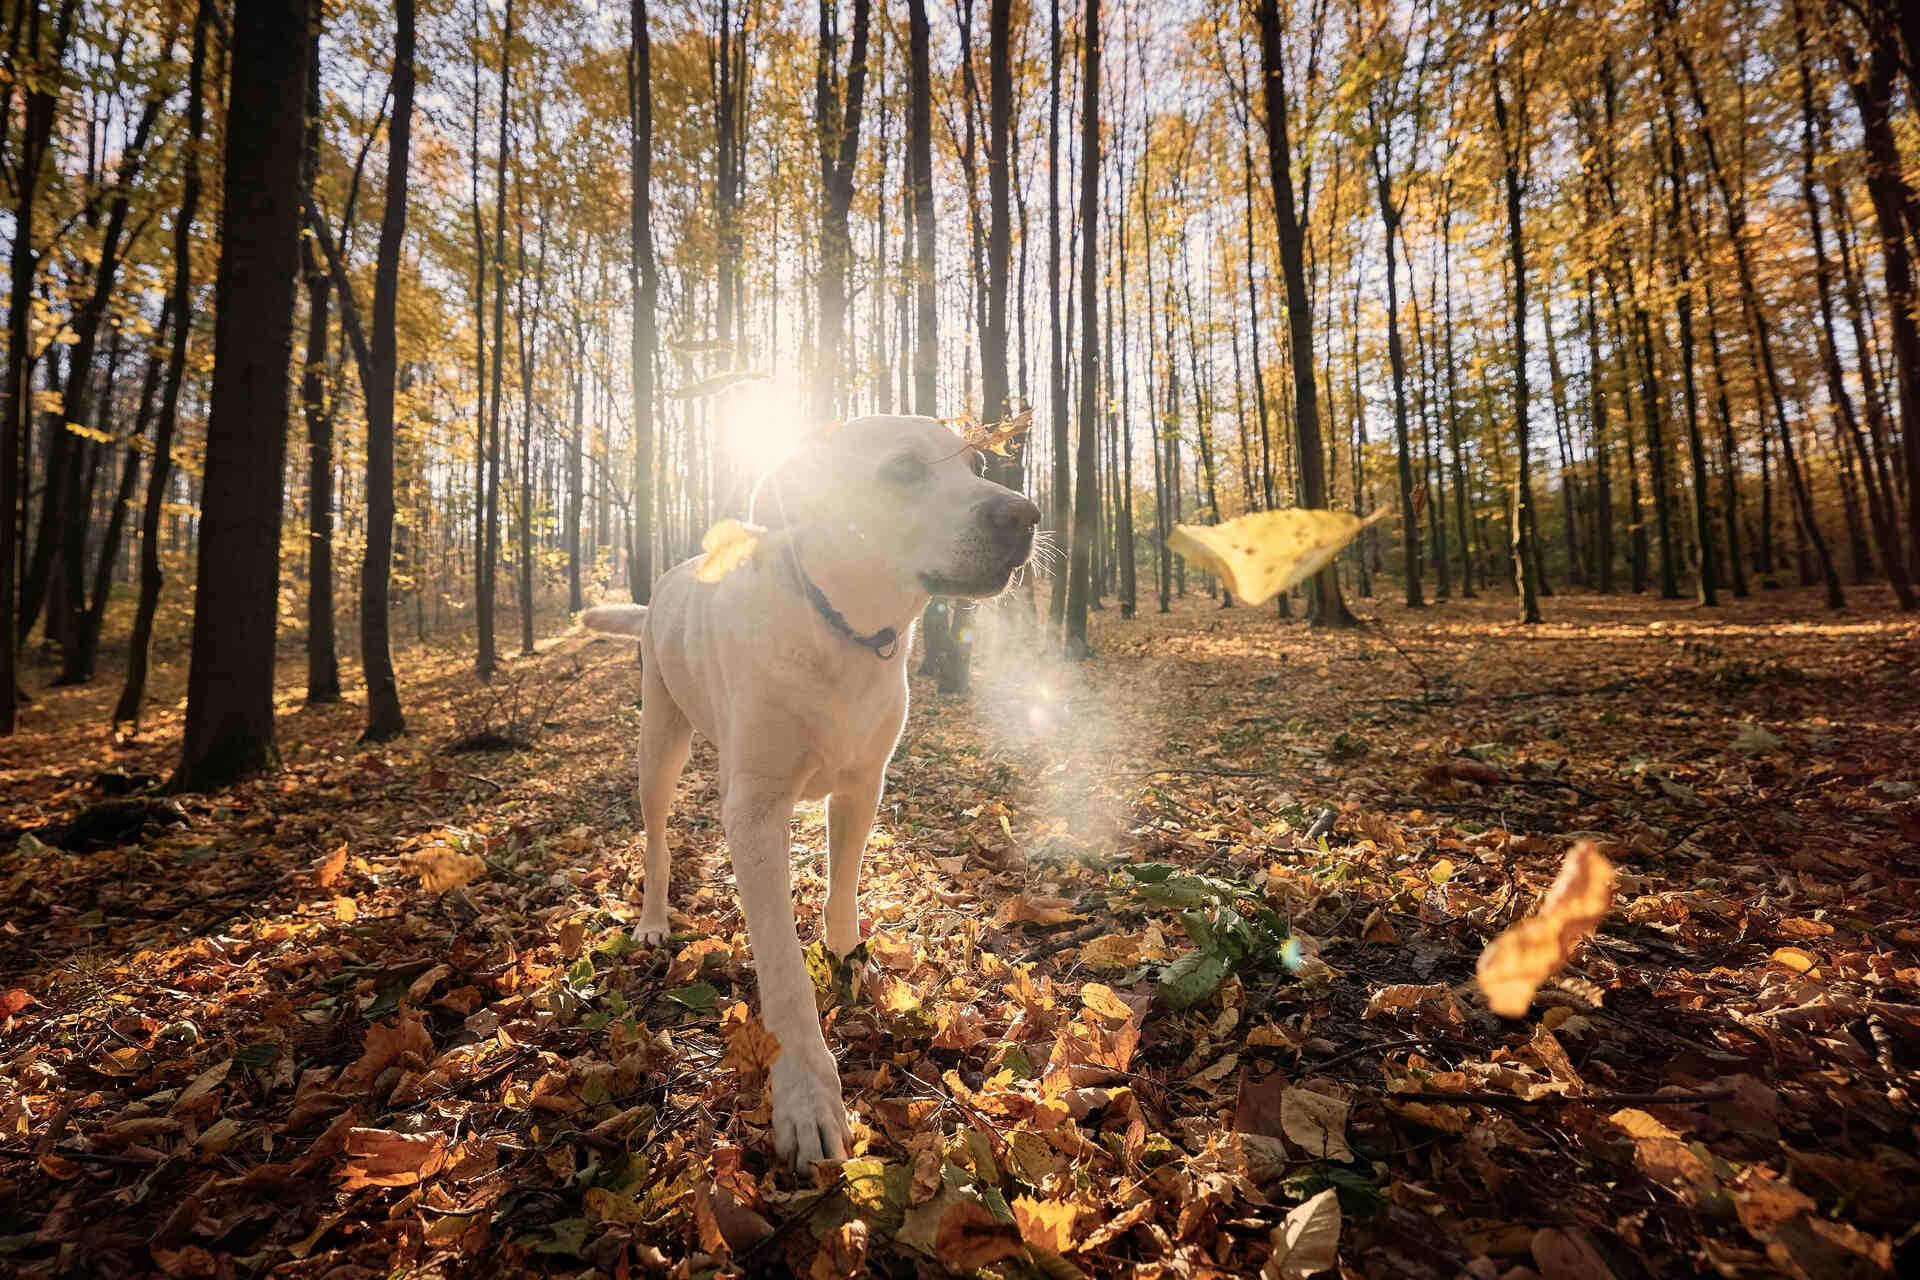 A dog wandering through a forest